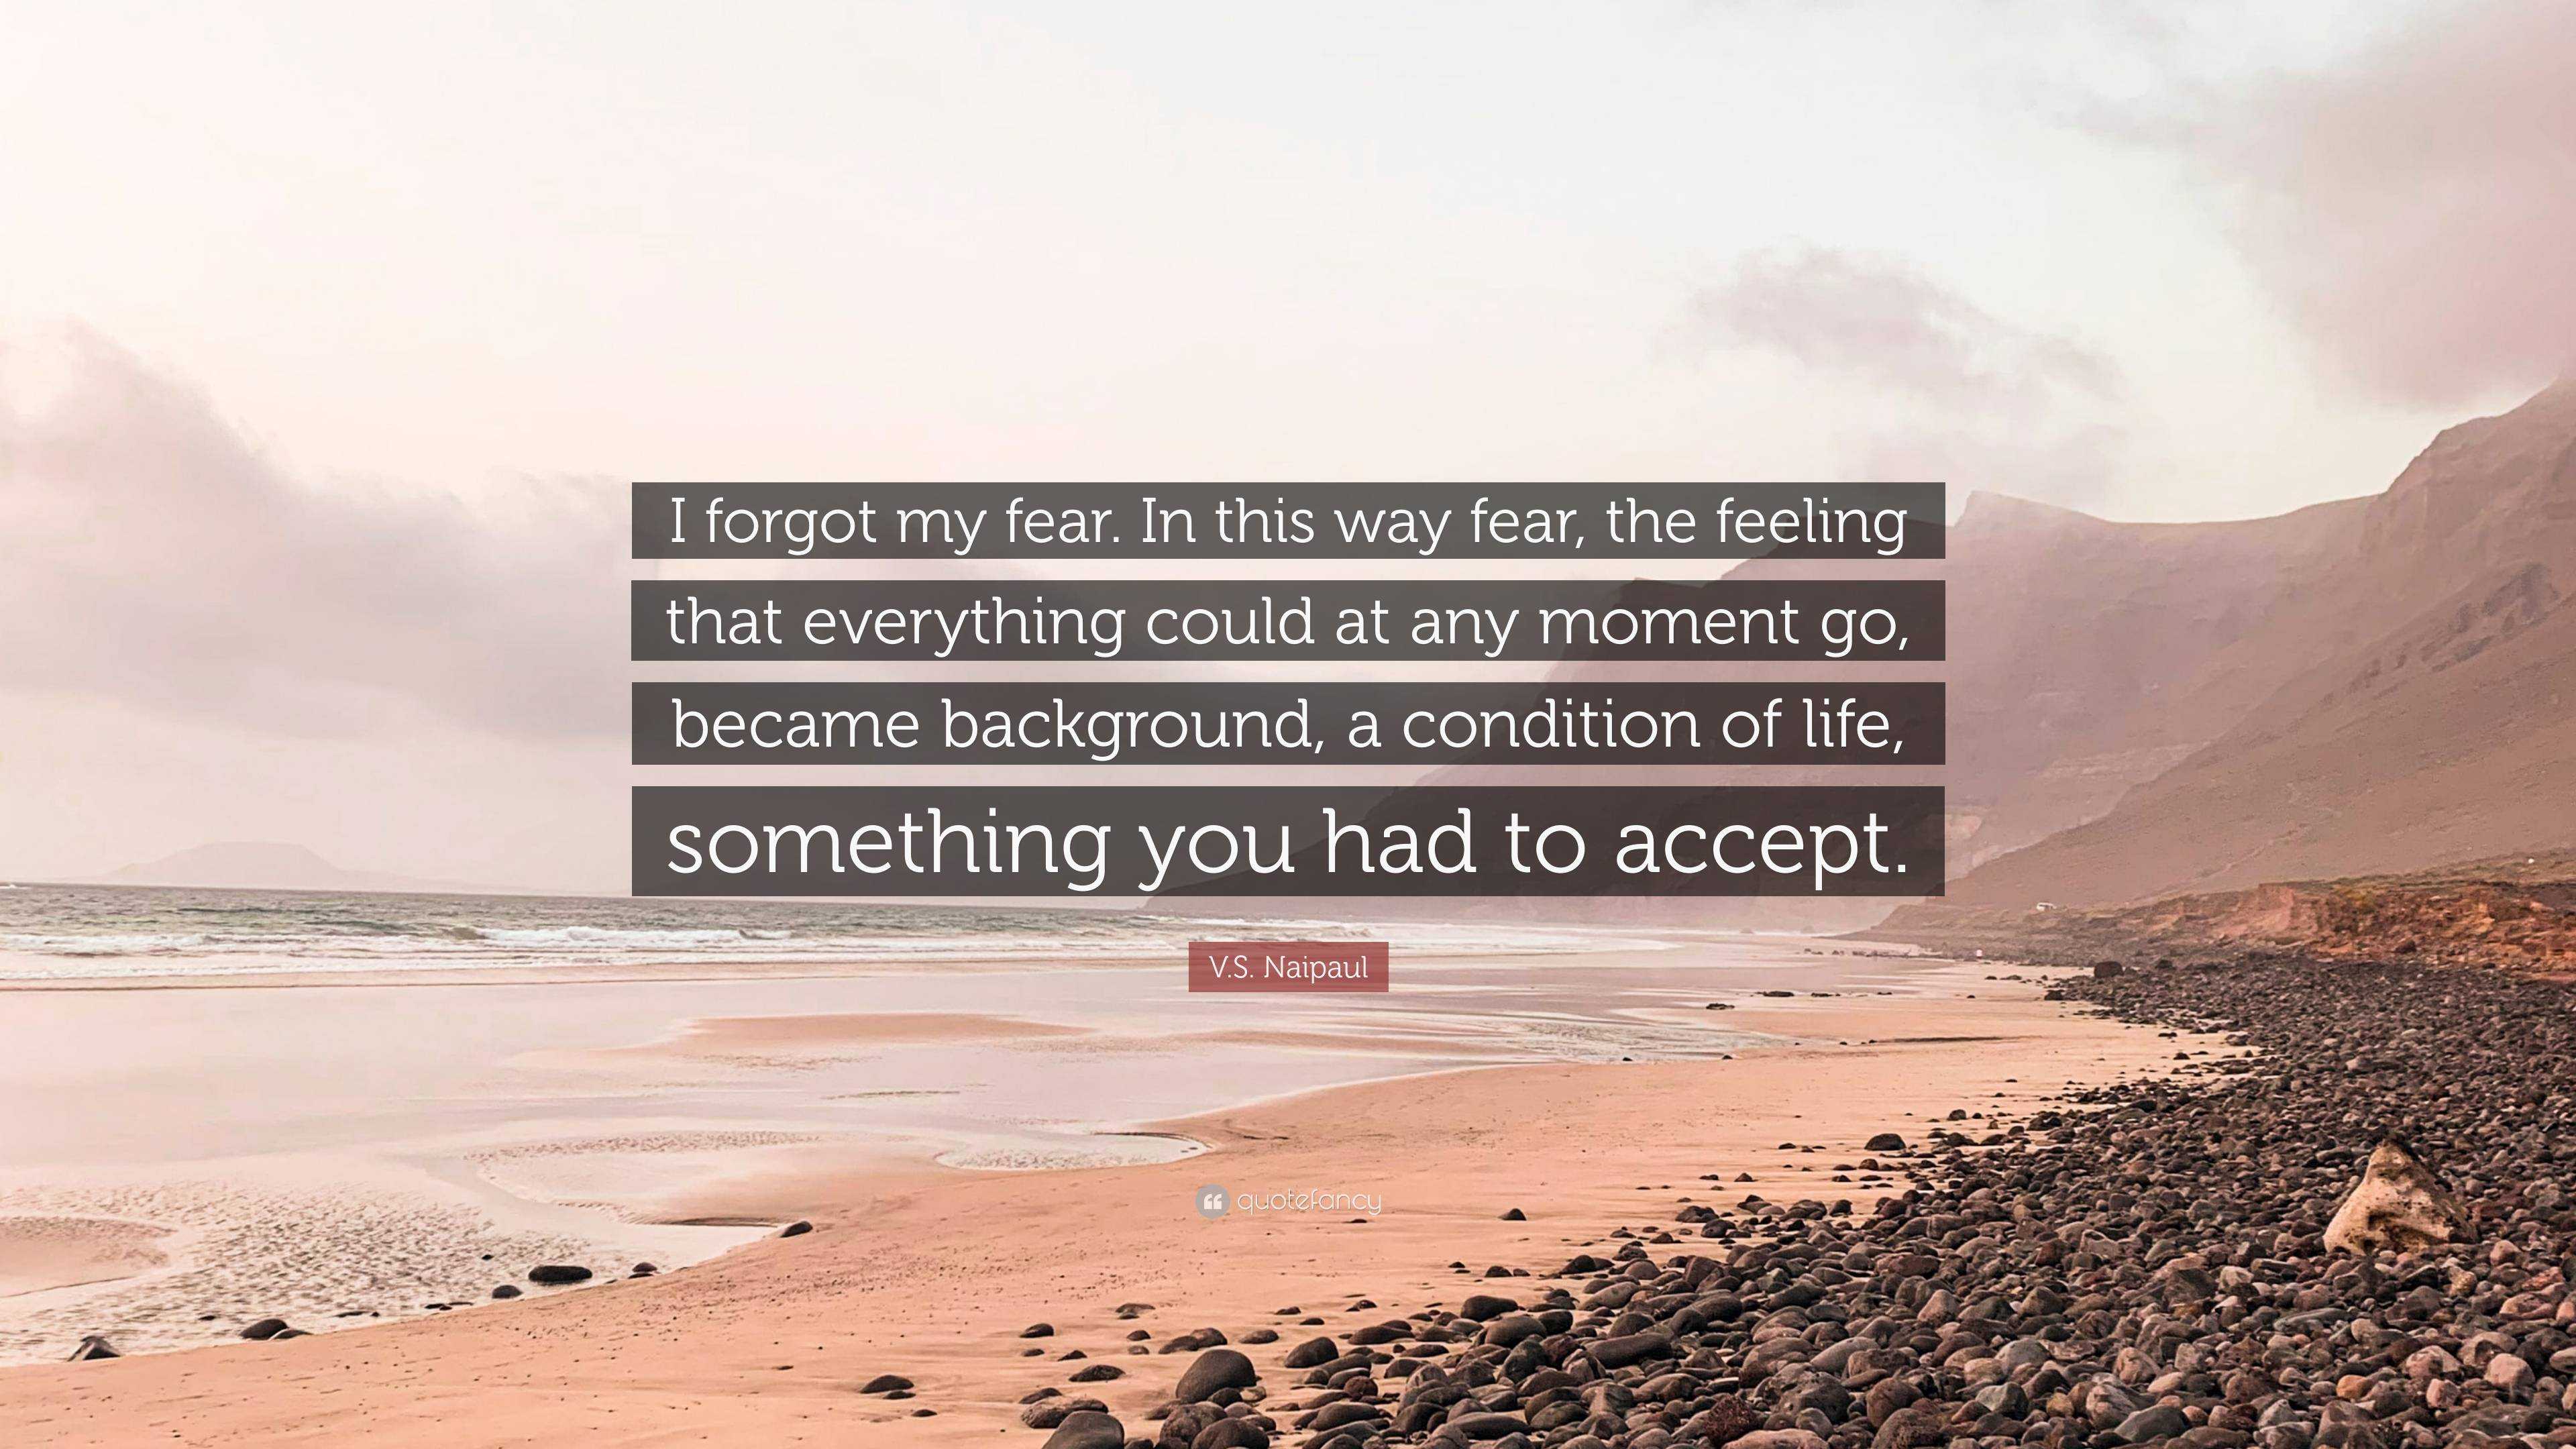 . Naipaul Quote: “I forgot my fear. In this way fear, the feeling that  everything could at any moment go, became background, a condition o...”